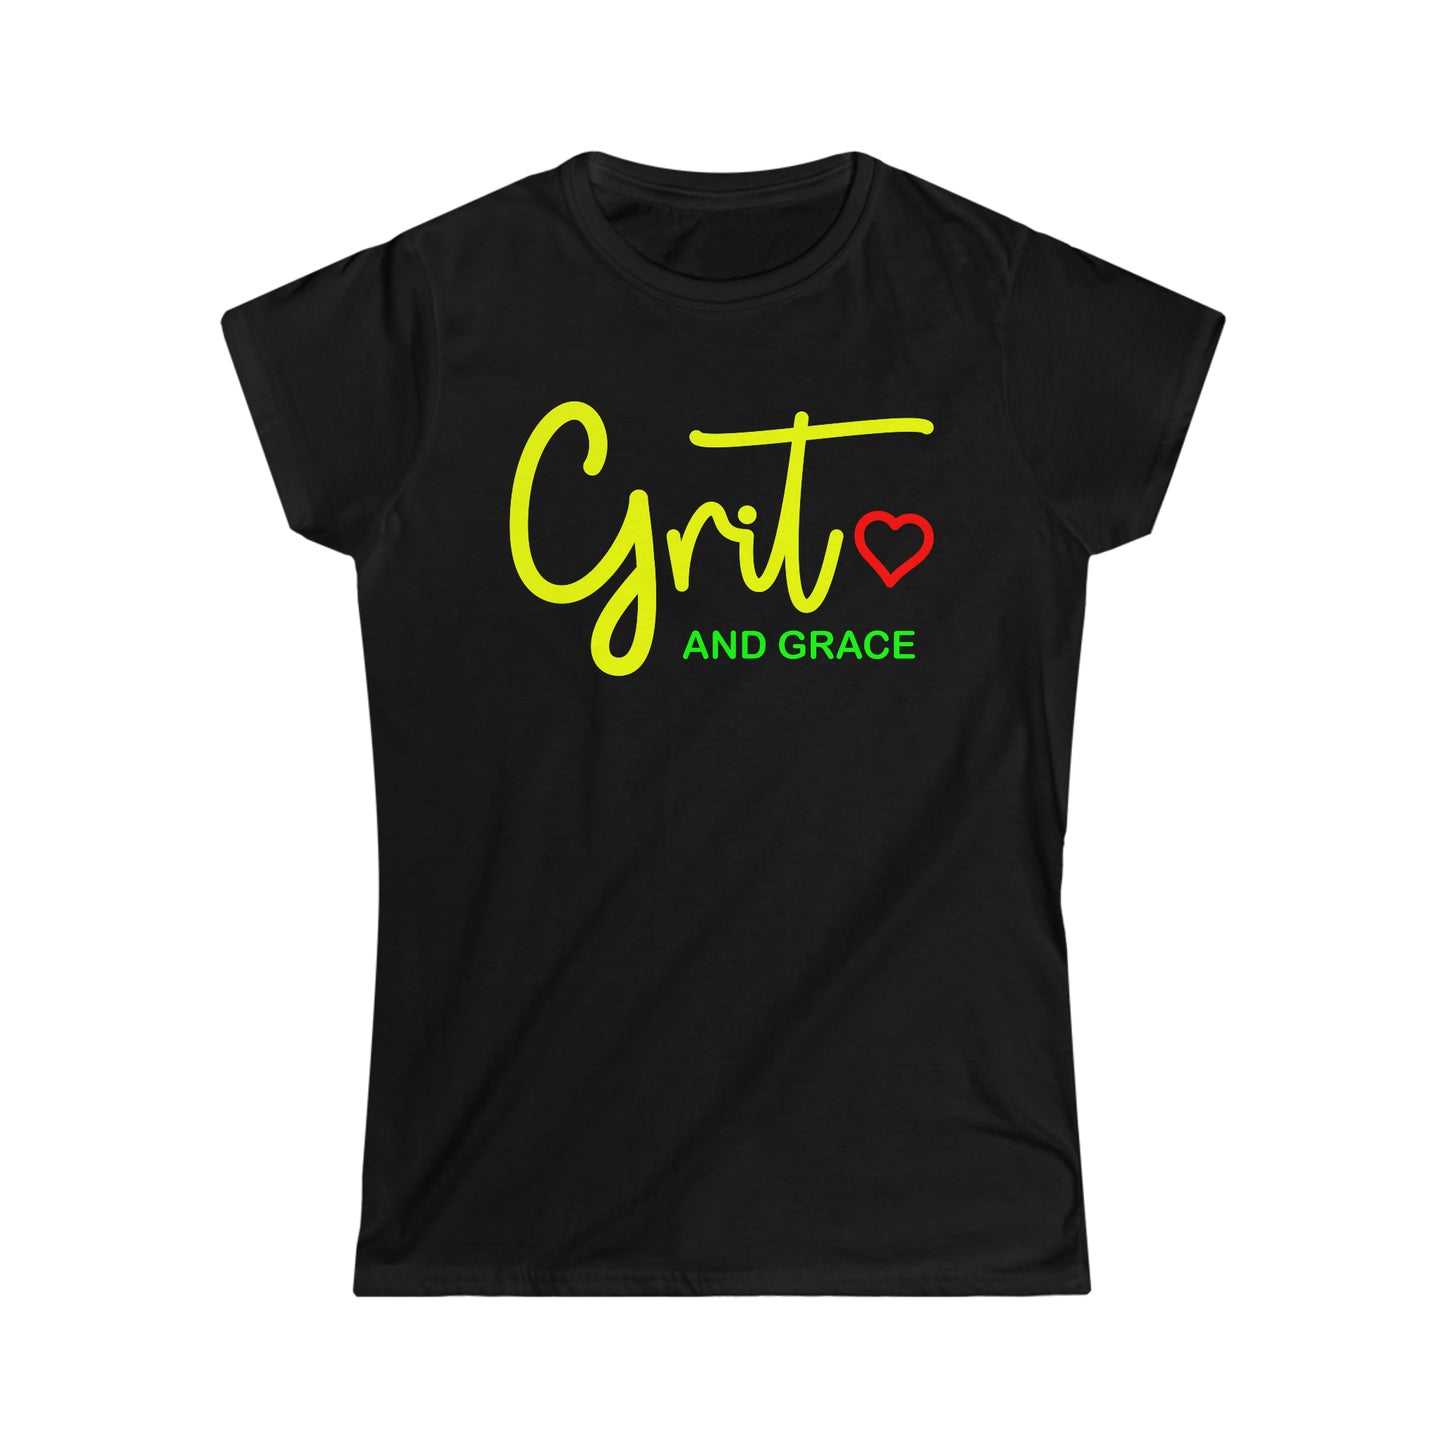 Christian Apparel (Grit & Grace/Women's Softstyle Tee)